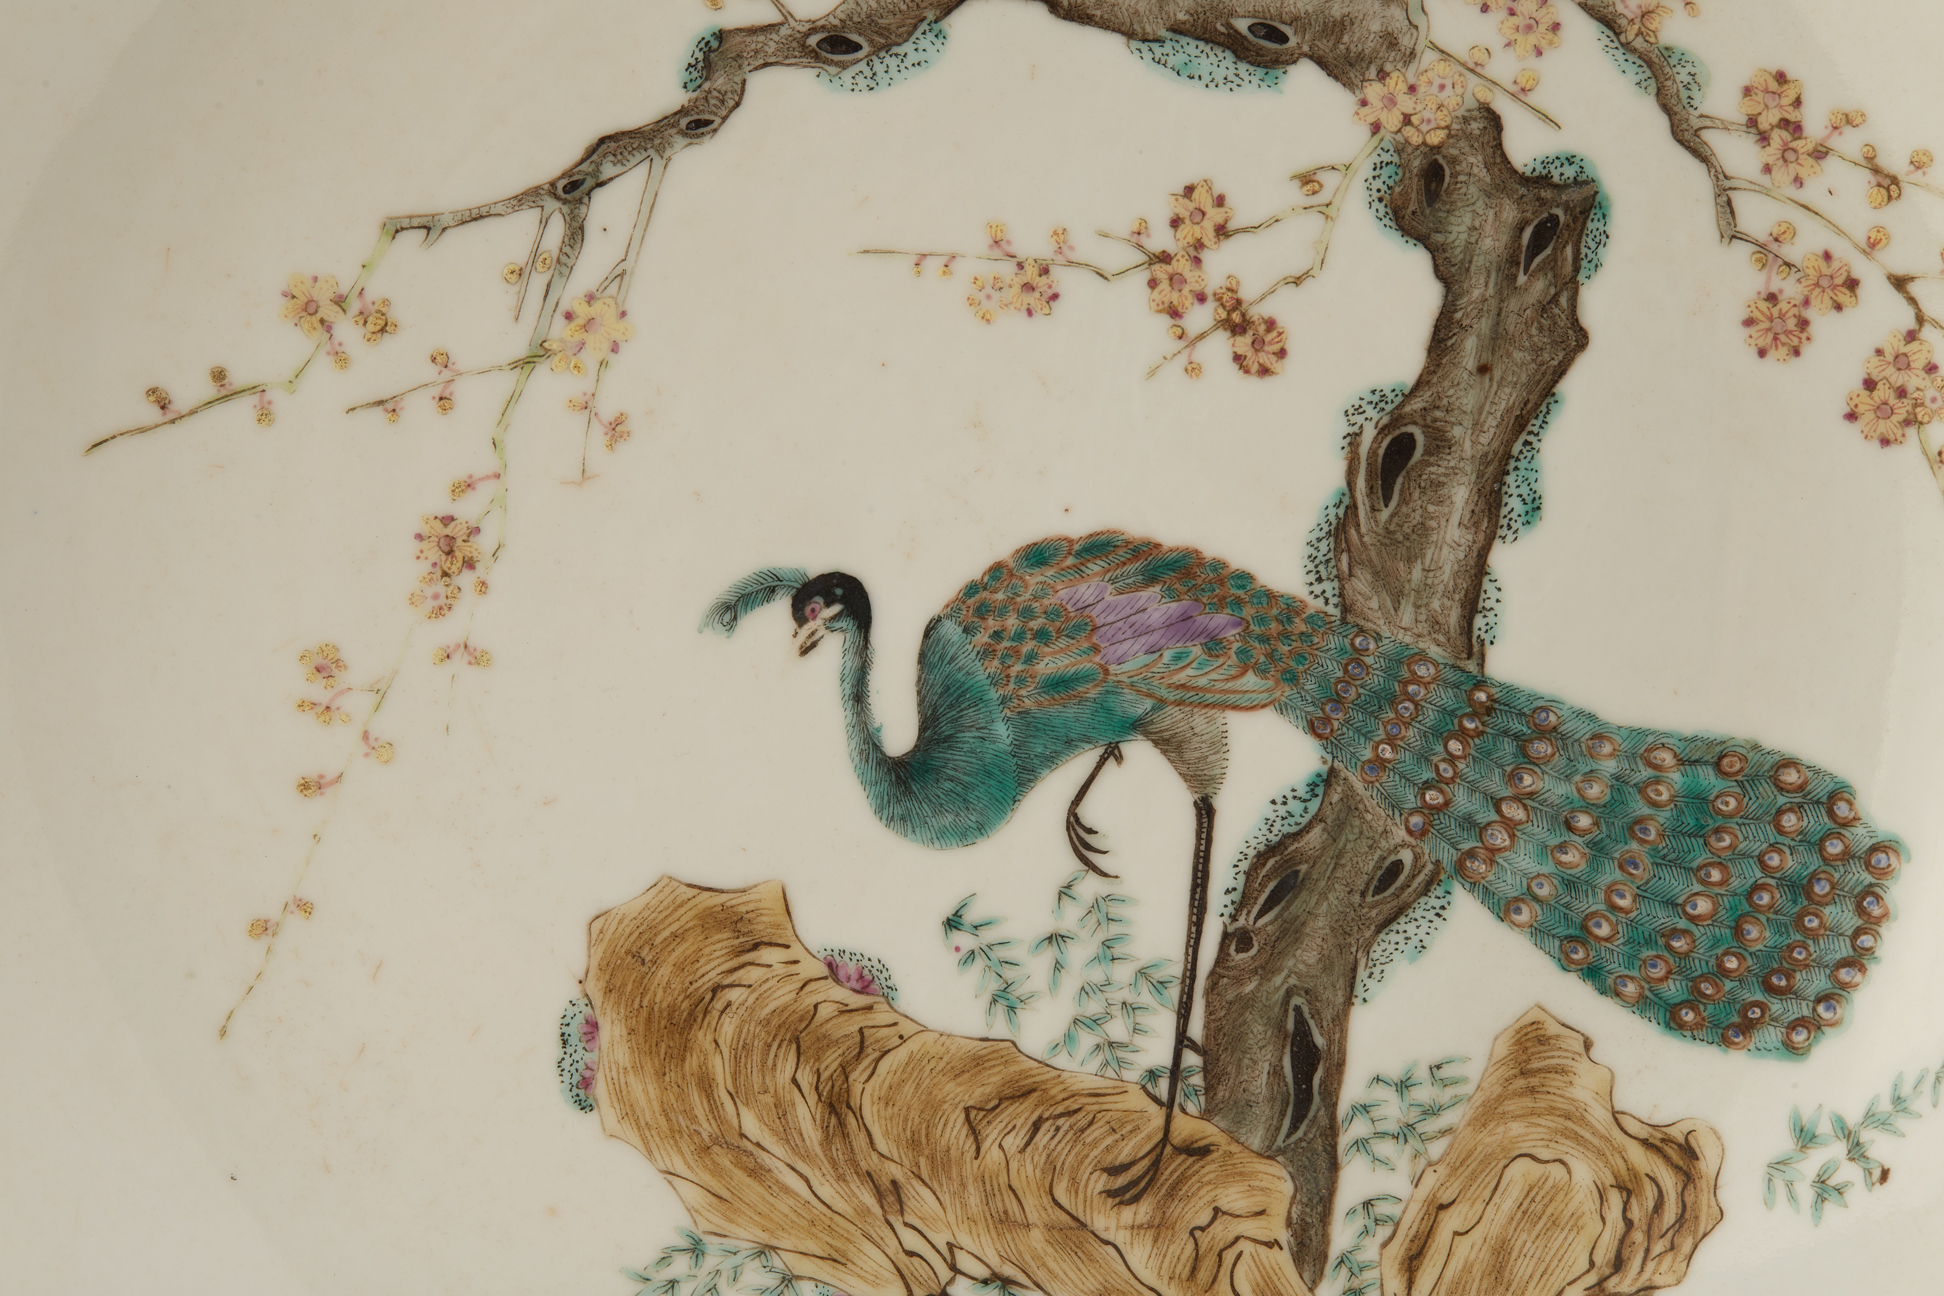 A FAMILLE ROSE PORCELAIN PEACOCK PLATE - Image 2 of 3